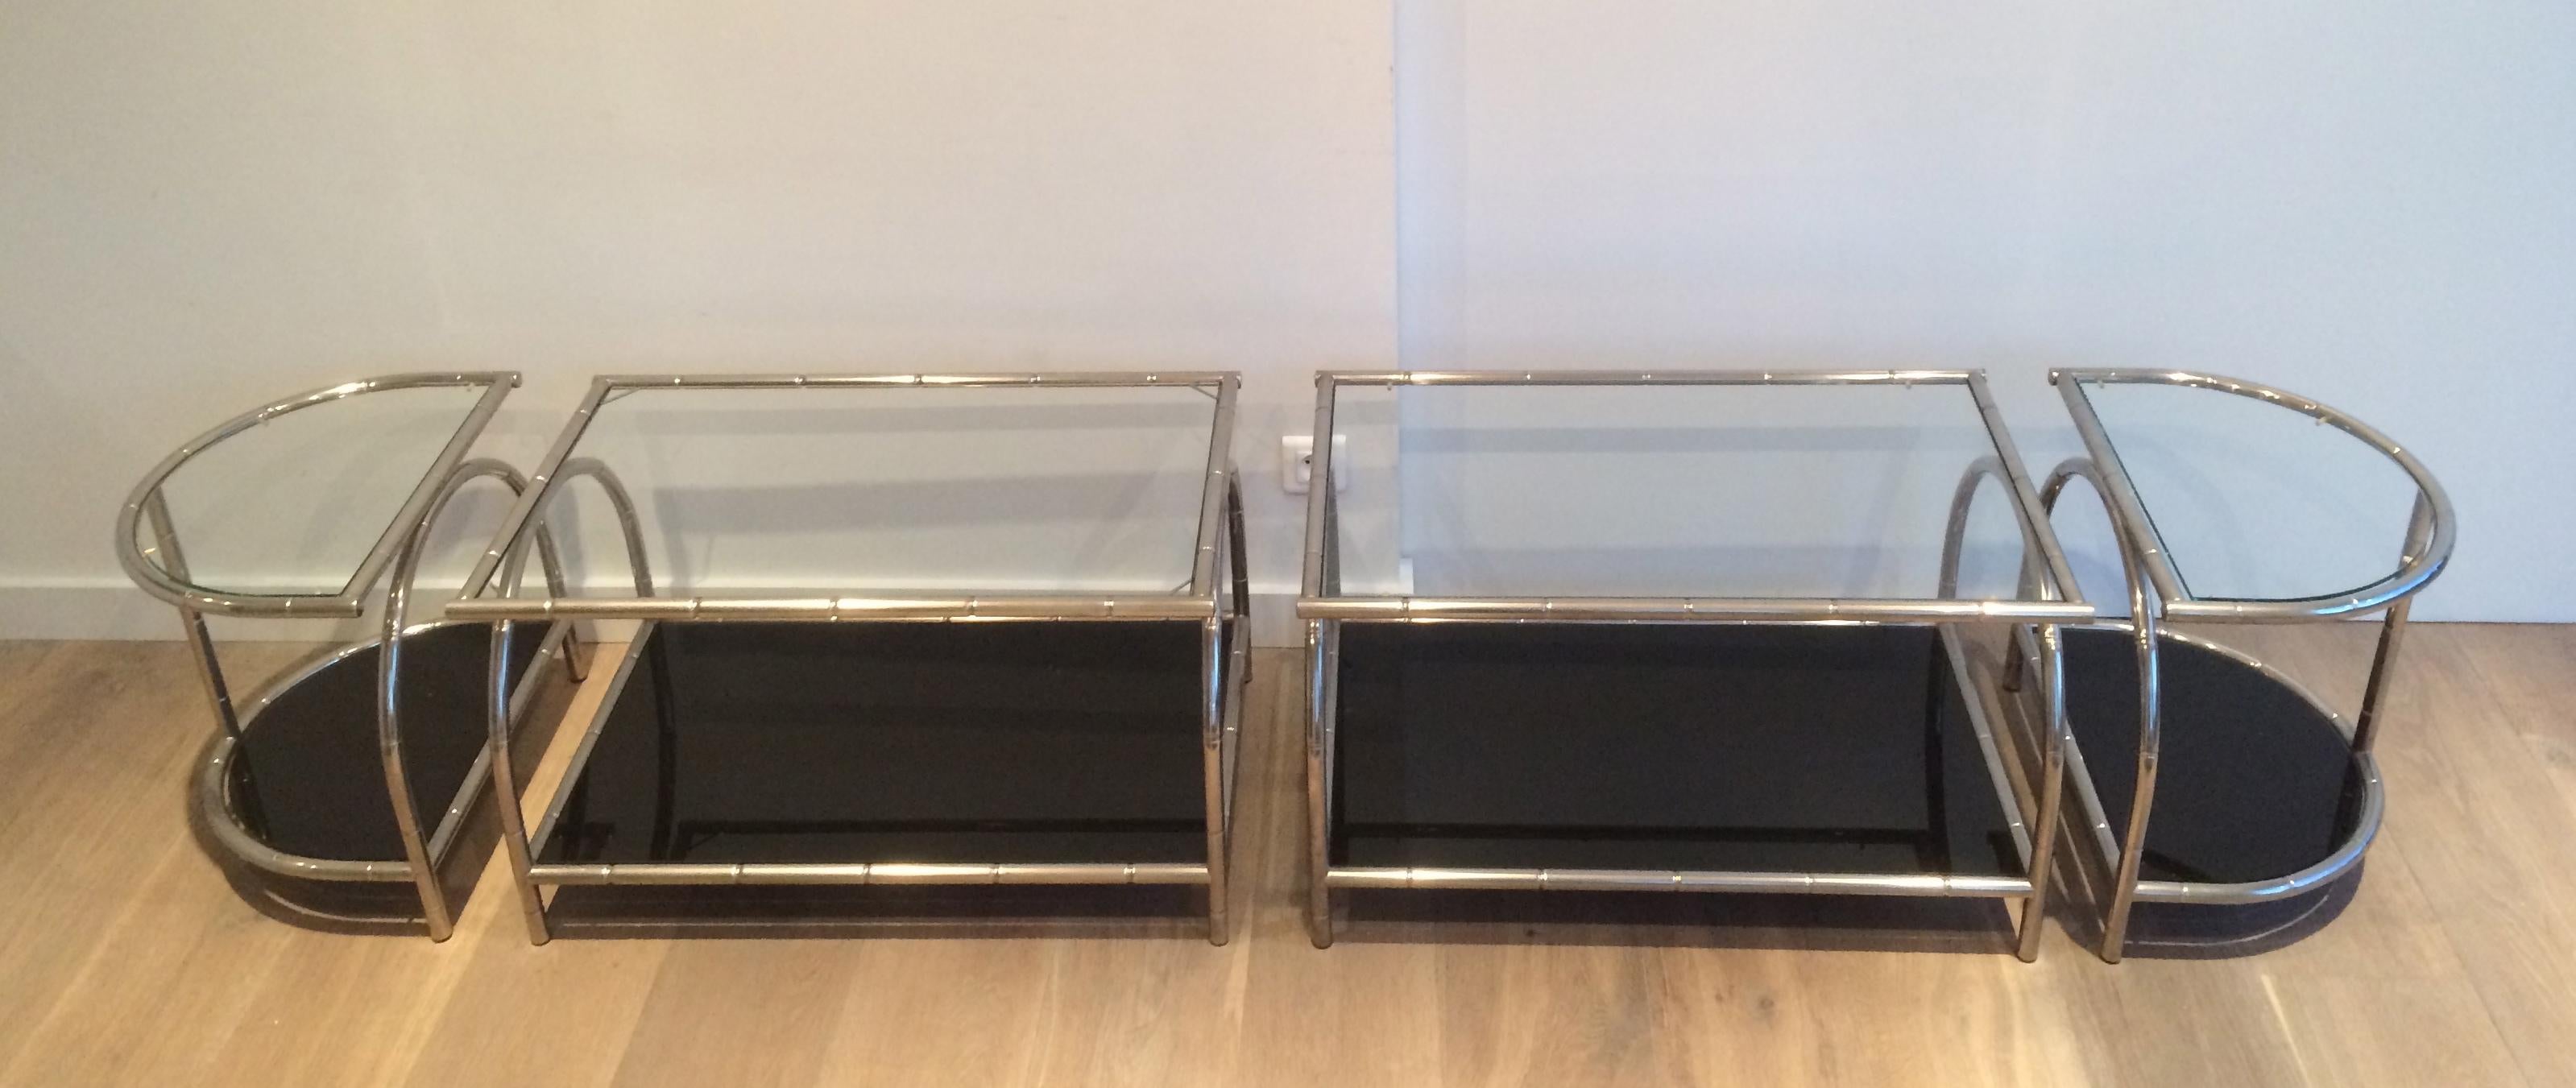 This rare very wide coffee table is made of chrome with 4 clear glass shelves on top and 4 black lacquered glass shelves on the bottom. This cocktail table is made of 4 elements: 2 rectangular coffee tables and 2 rounded tables on each side. These